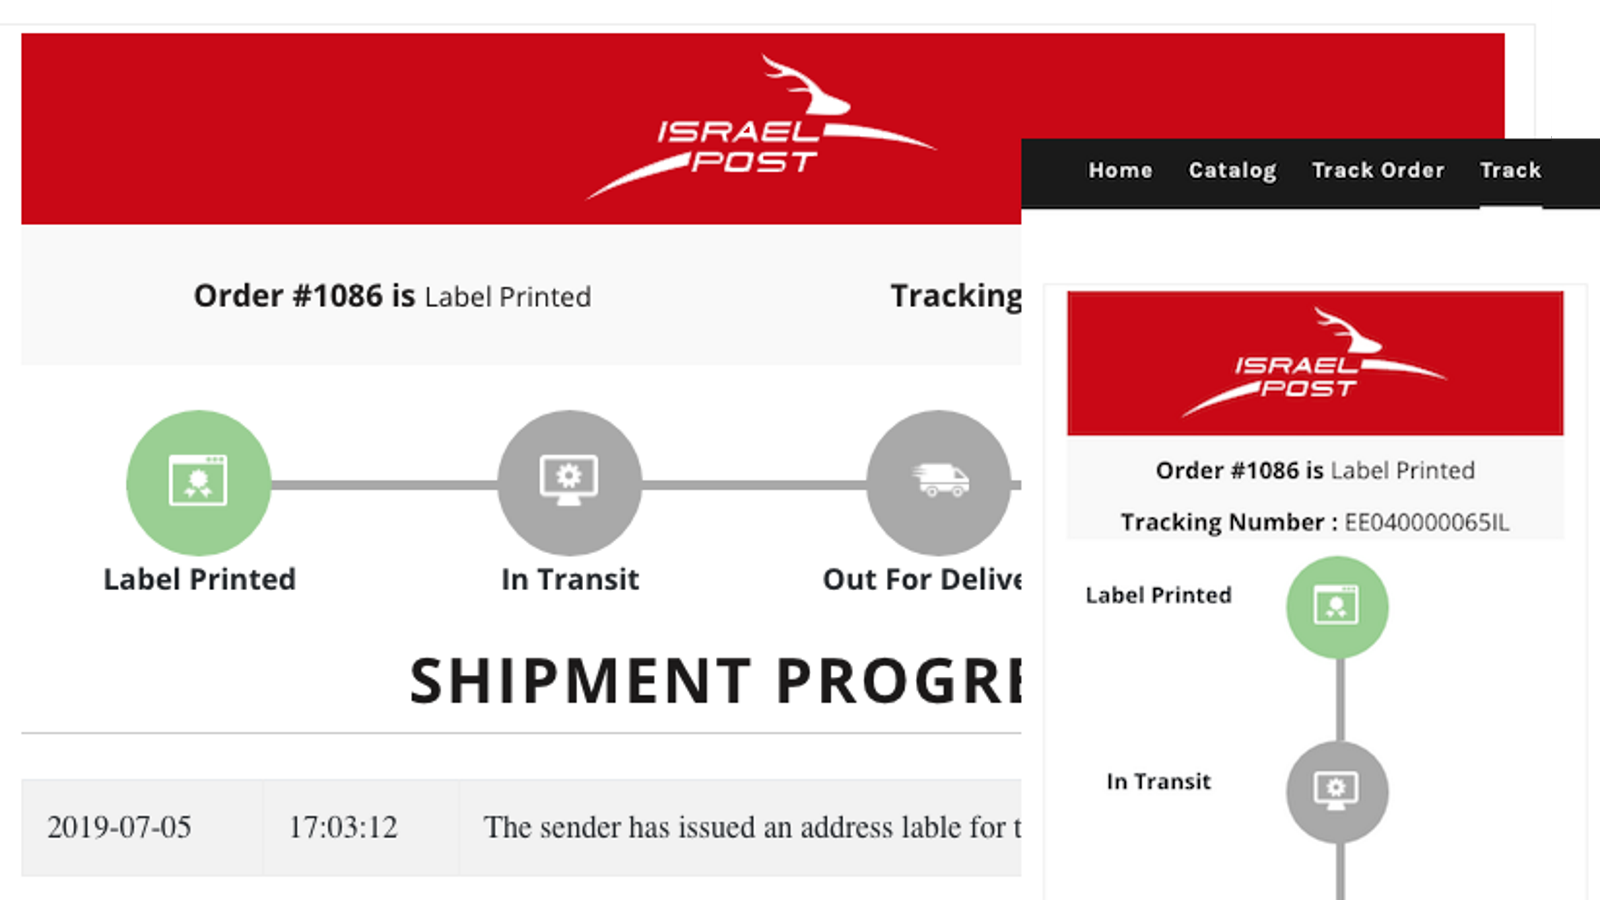 Branded Tracking Page